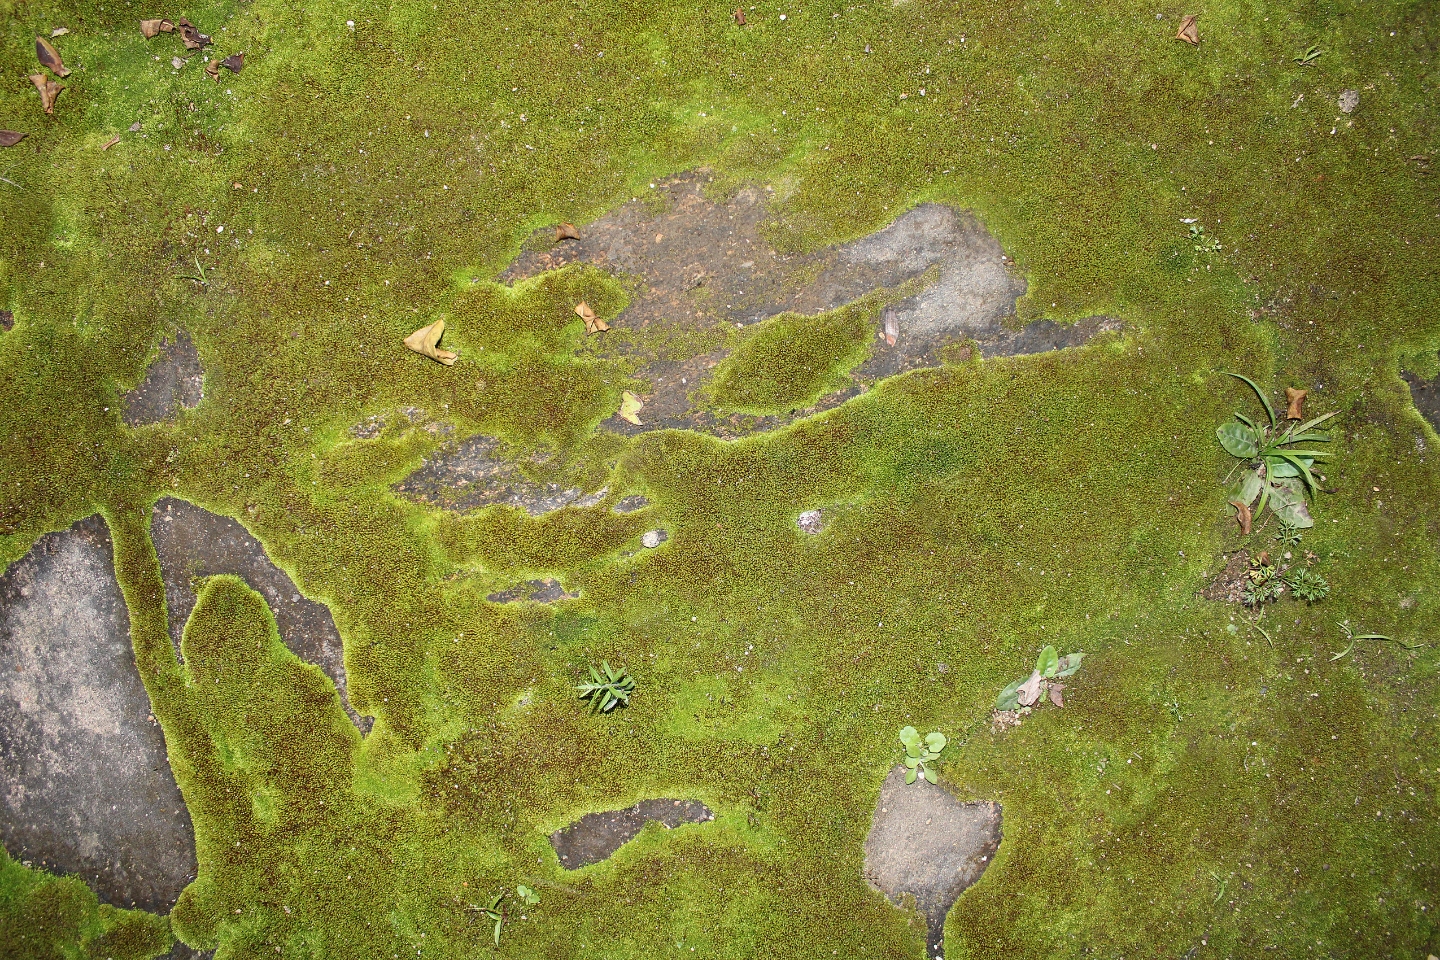 Green Stuff The Biology Of Algae And Duckweed Q&a